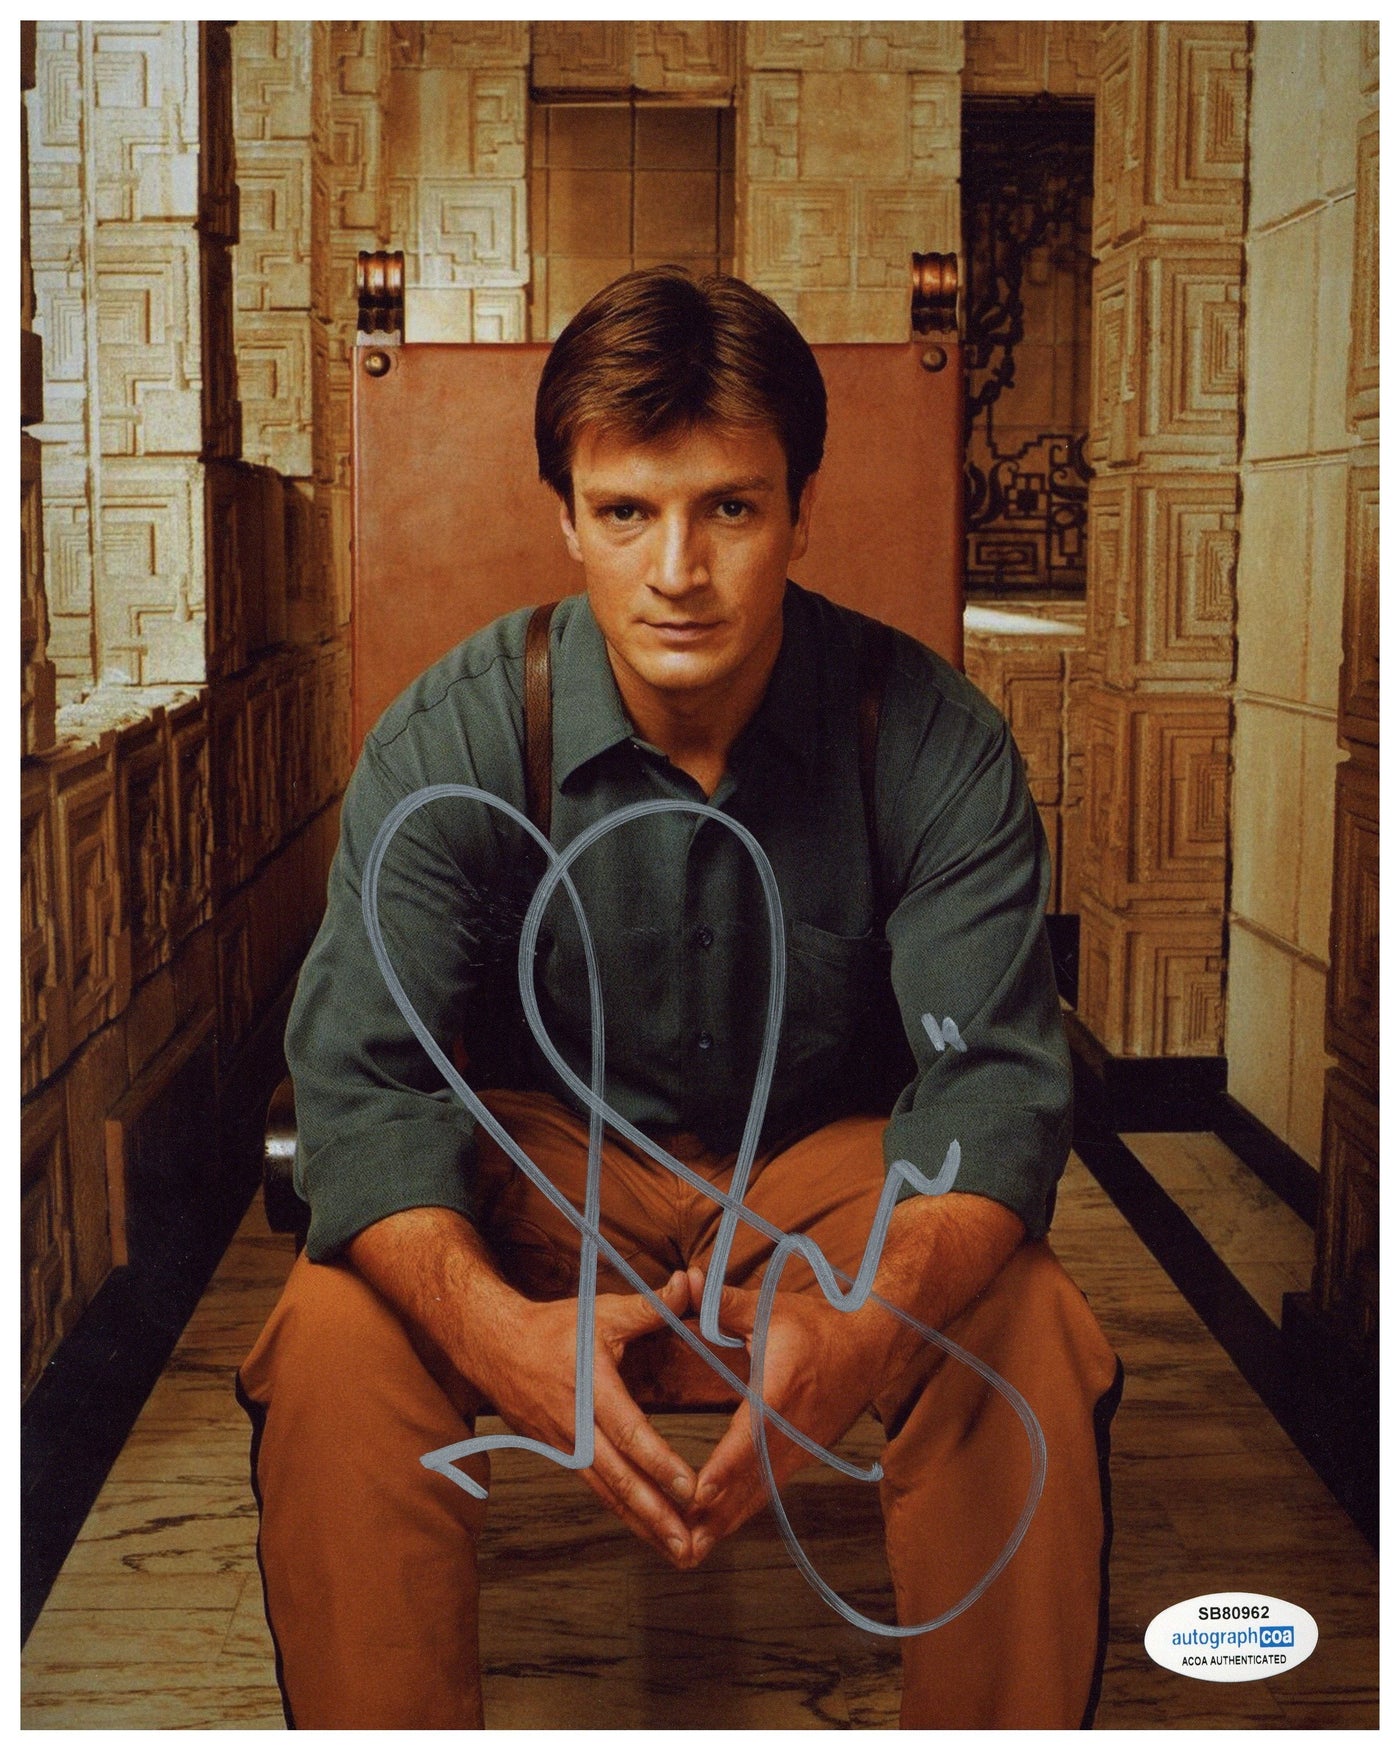 Nathan Fillion Signed 8x10 Photograph Firefly Capt Mal Reynolds Autographed ACOA 2